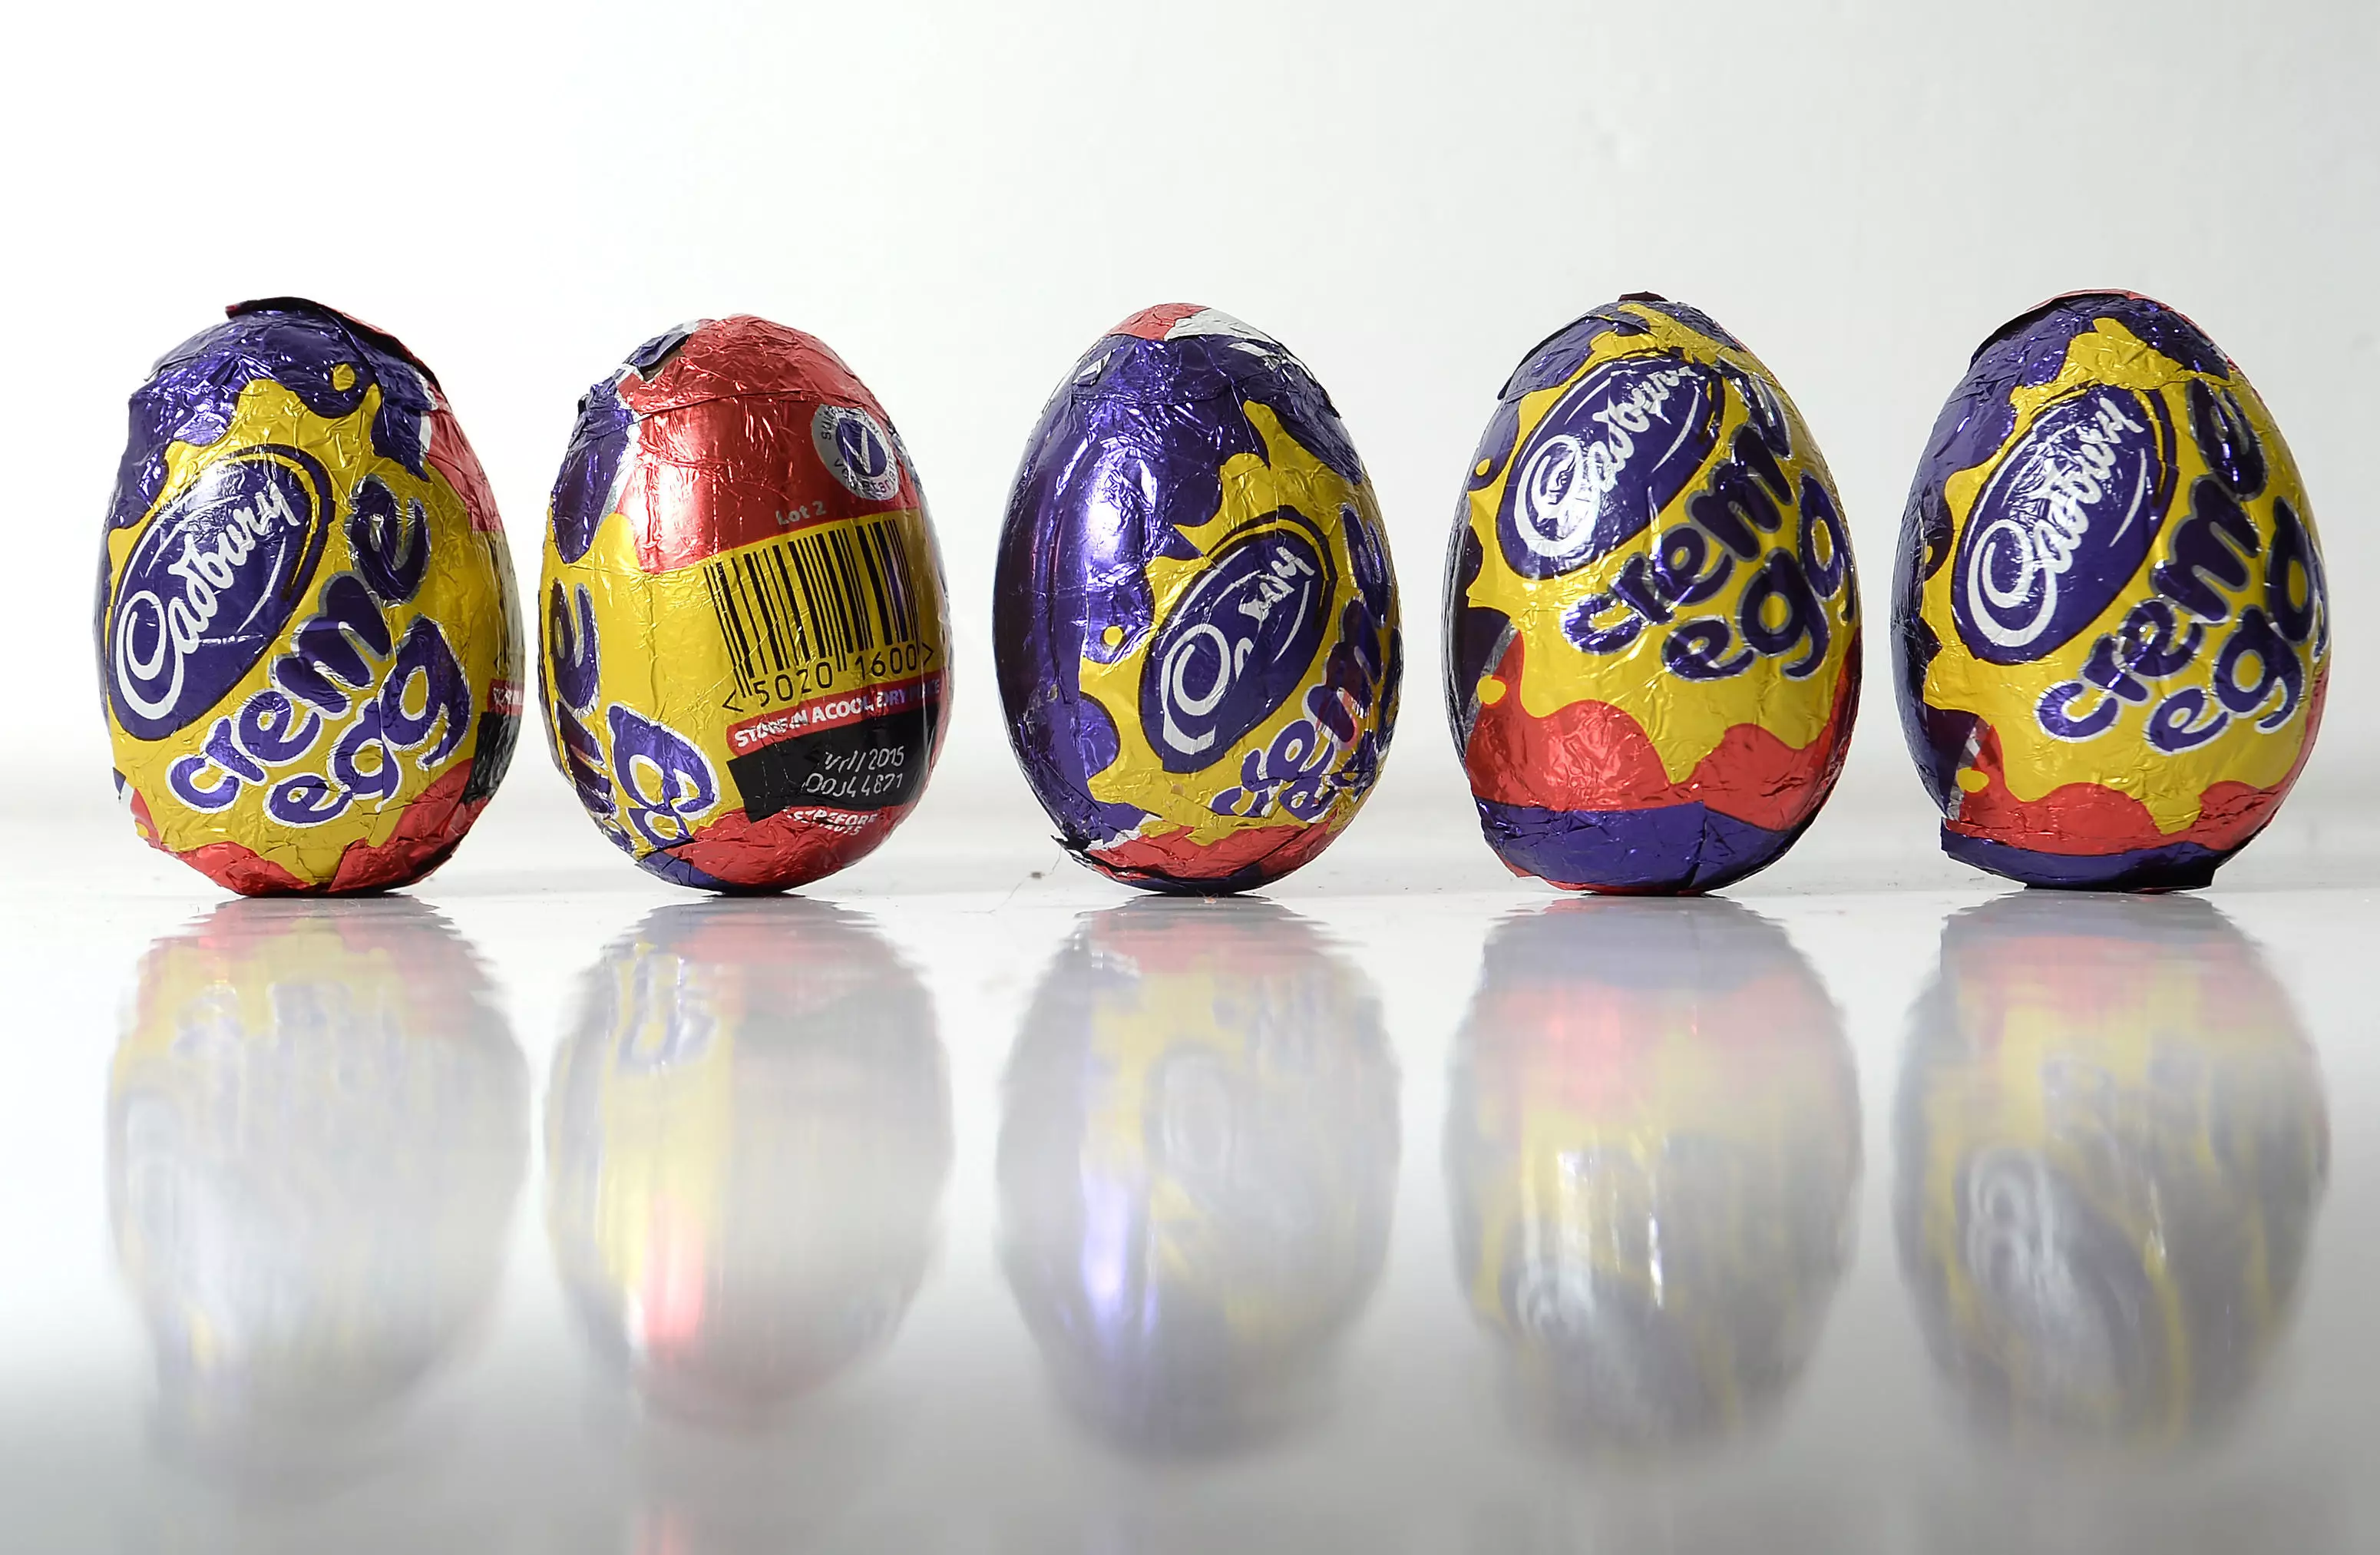 Creme Eggs are celebrating 50 years (